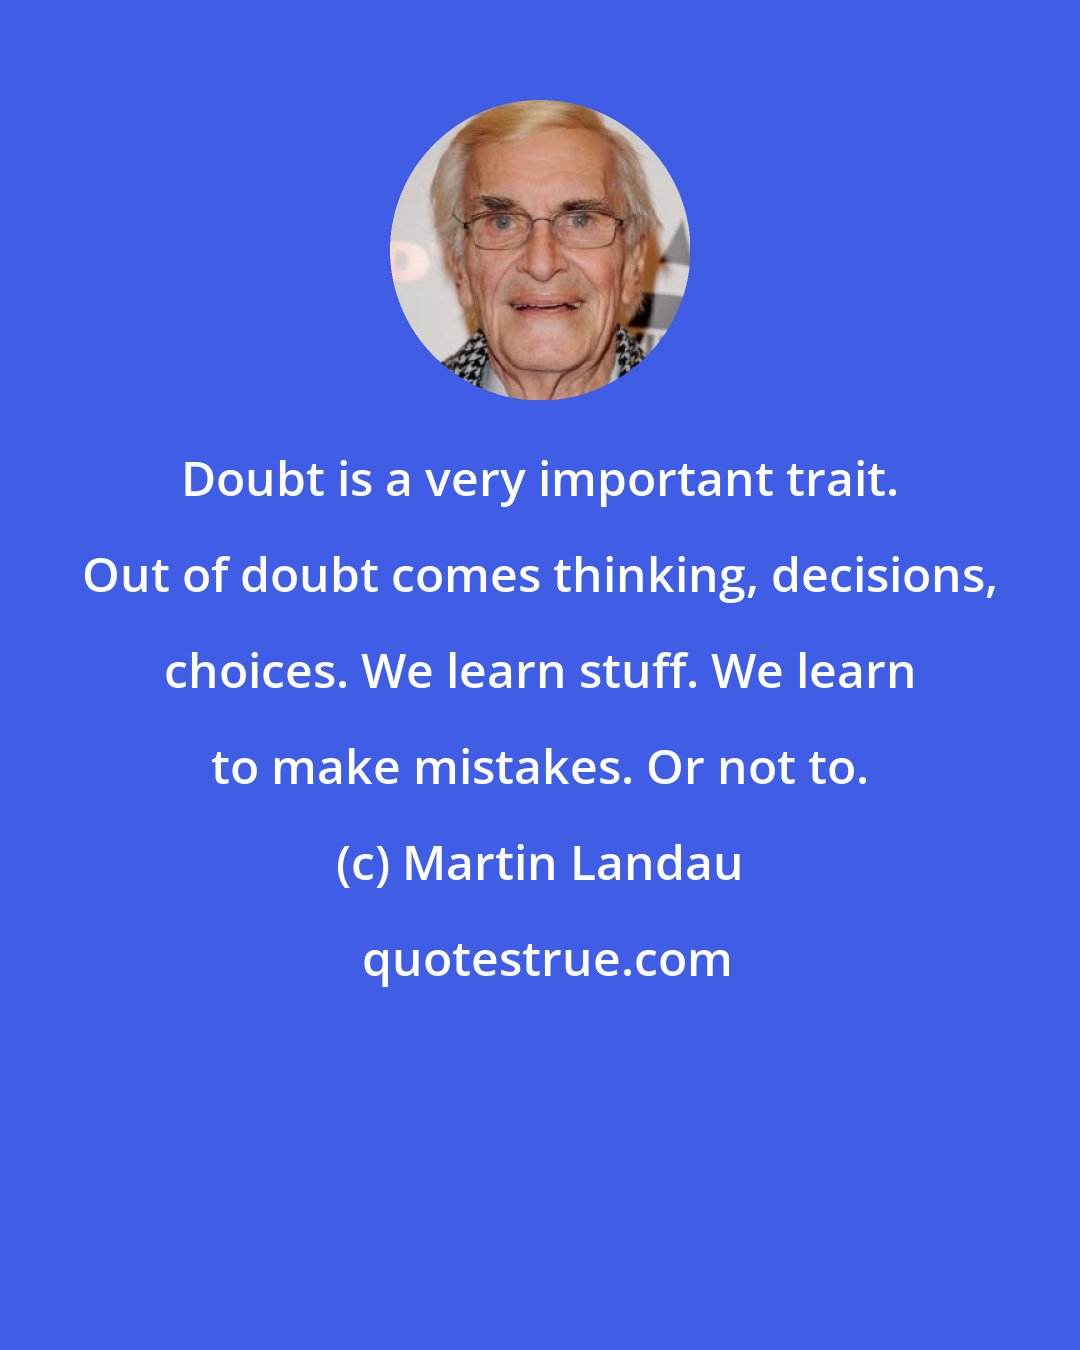 Martin Landau: Doubt is a very important trait. Out of doubt comes thinking, decisions, choices. We learn stuff. We learn to make mistakes. Or not to.